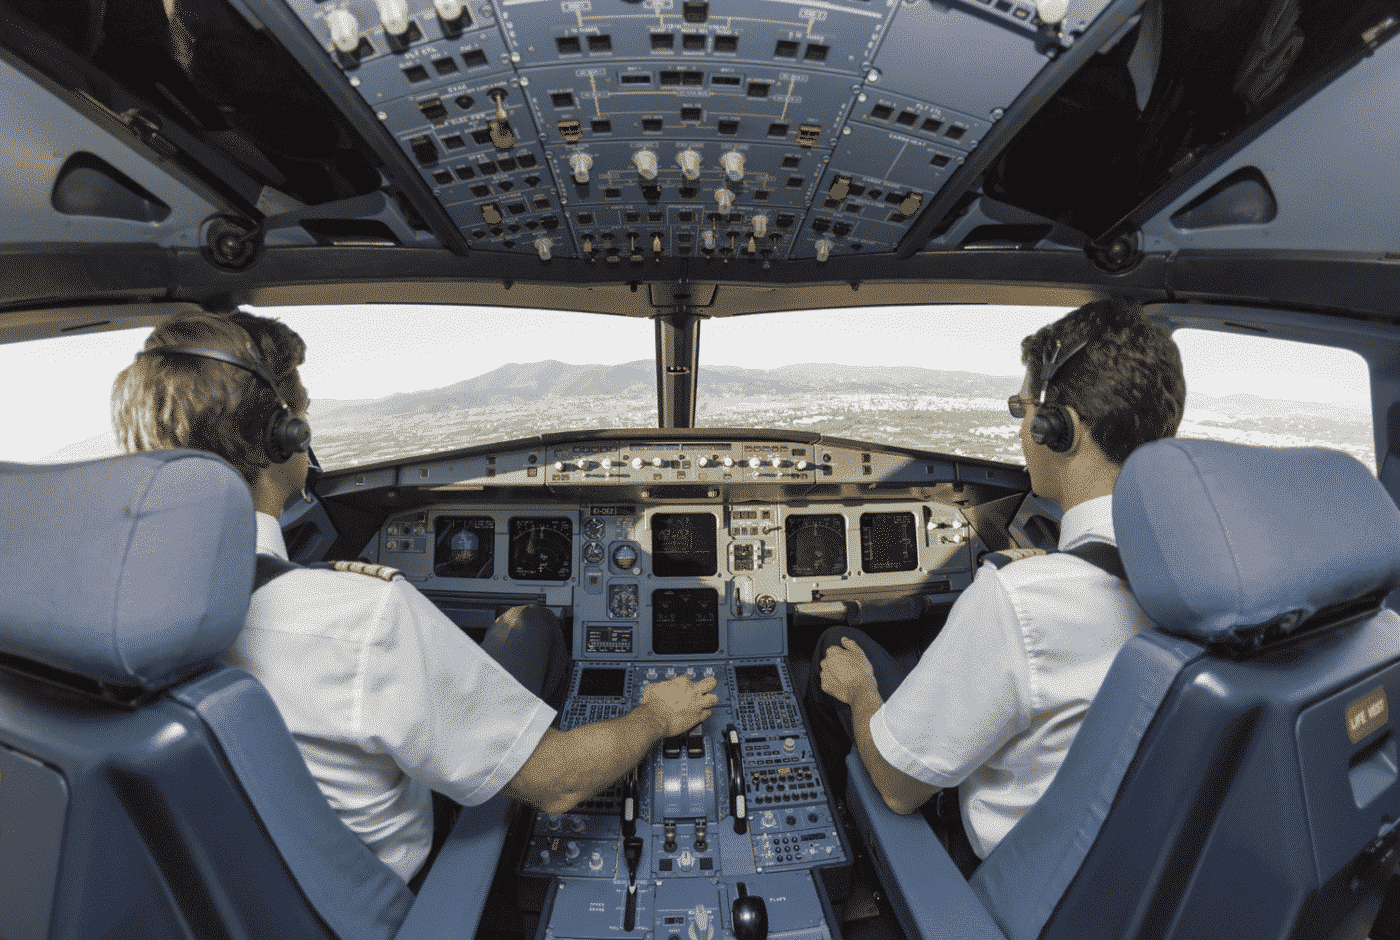 Becoming an airline pilot and passing the psychometric tests